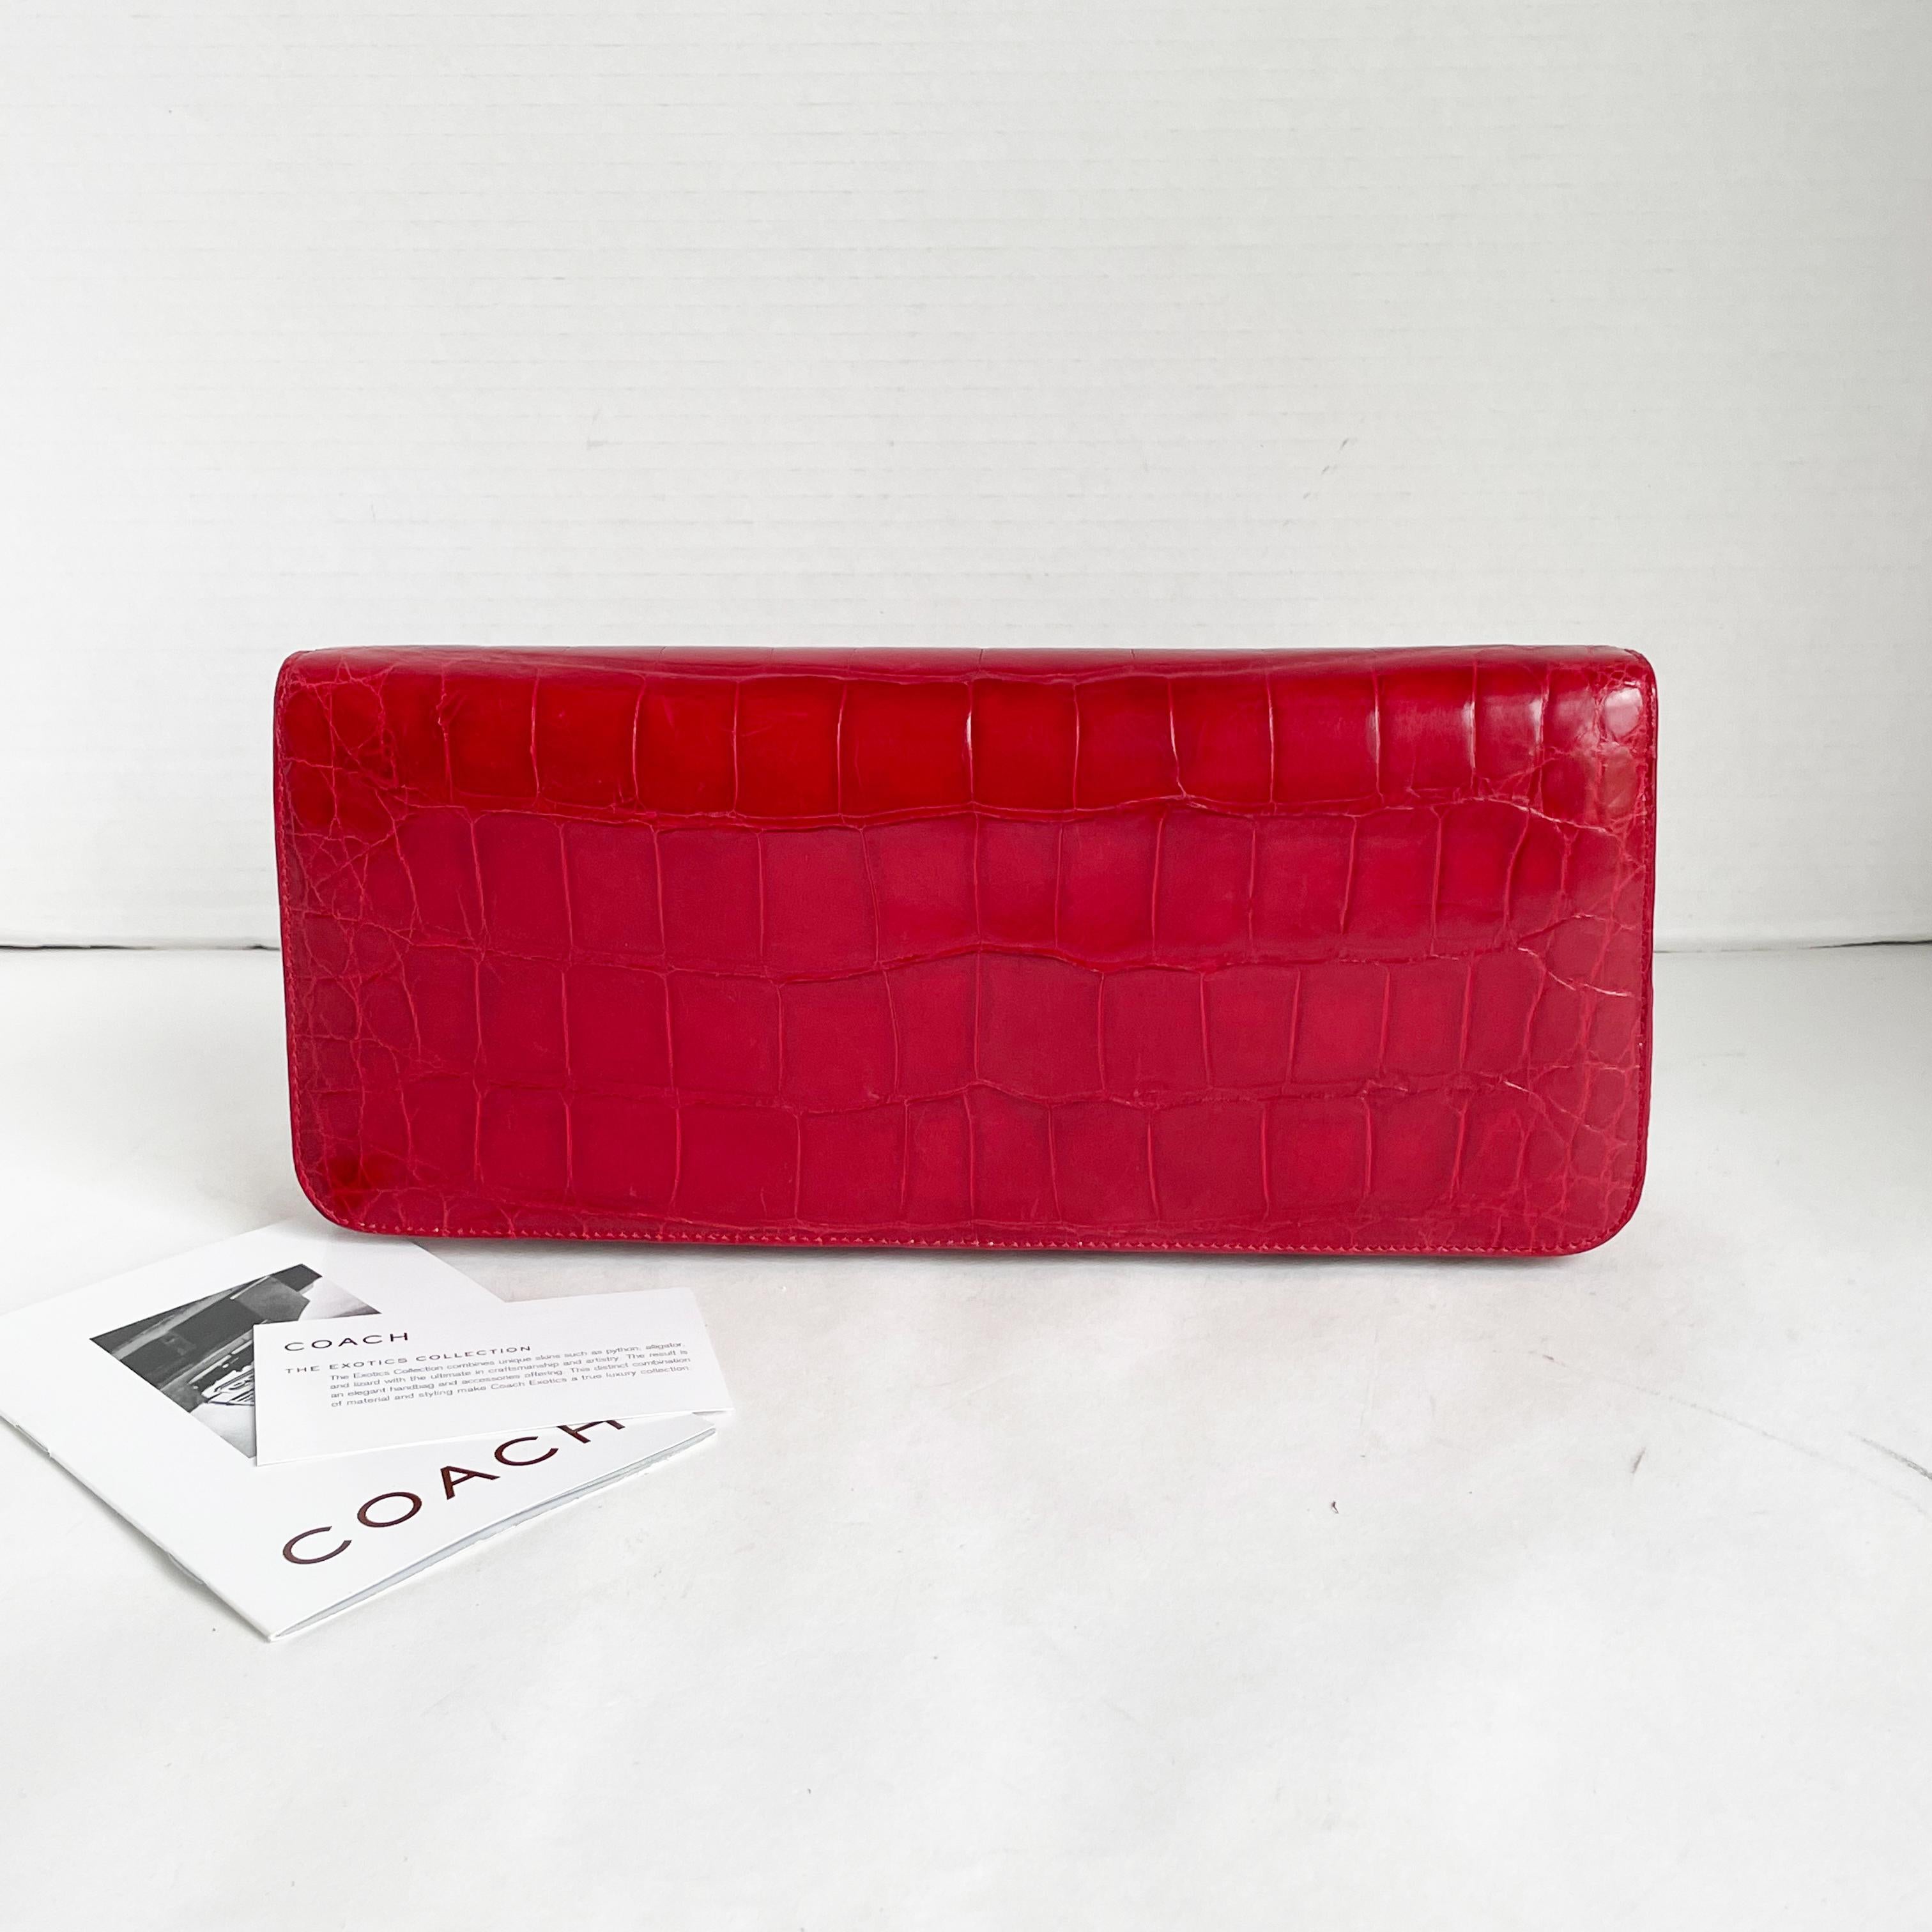 Women's or Men's Coach Large Clutch Bag #8389 Italy Limited Edition Red Exotic Alligator HTF Rare For Sale